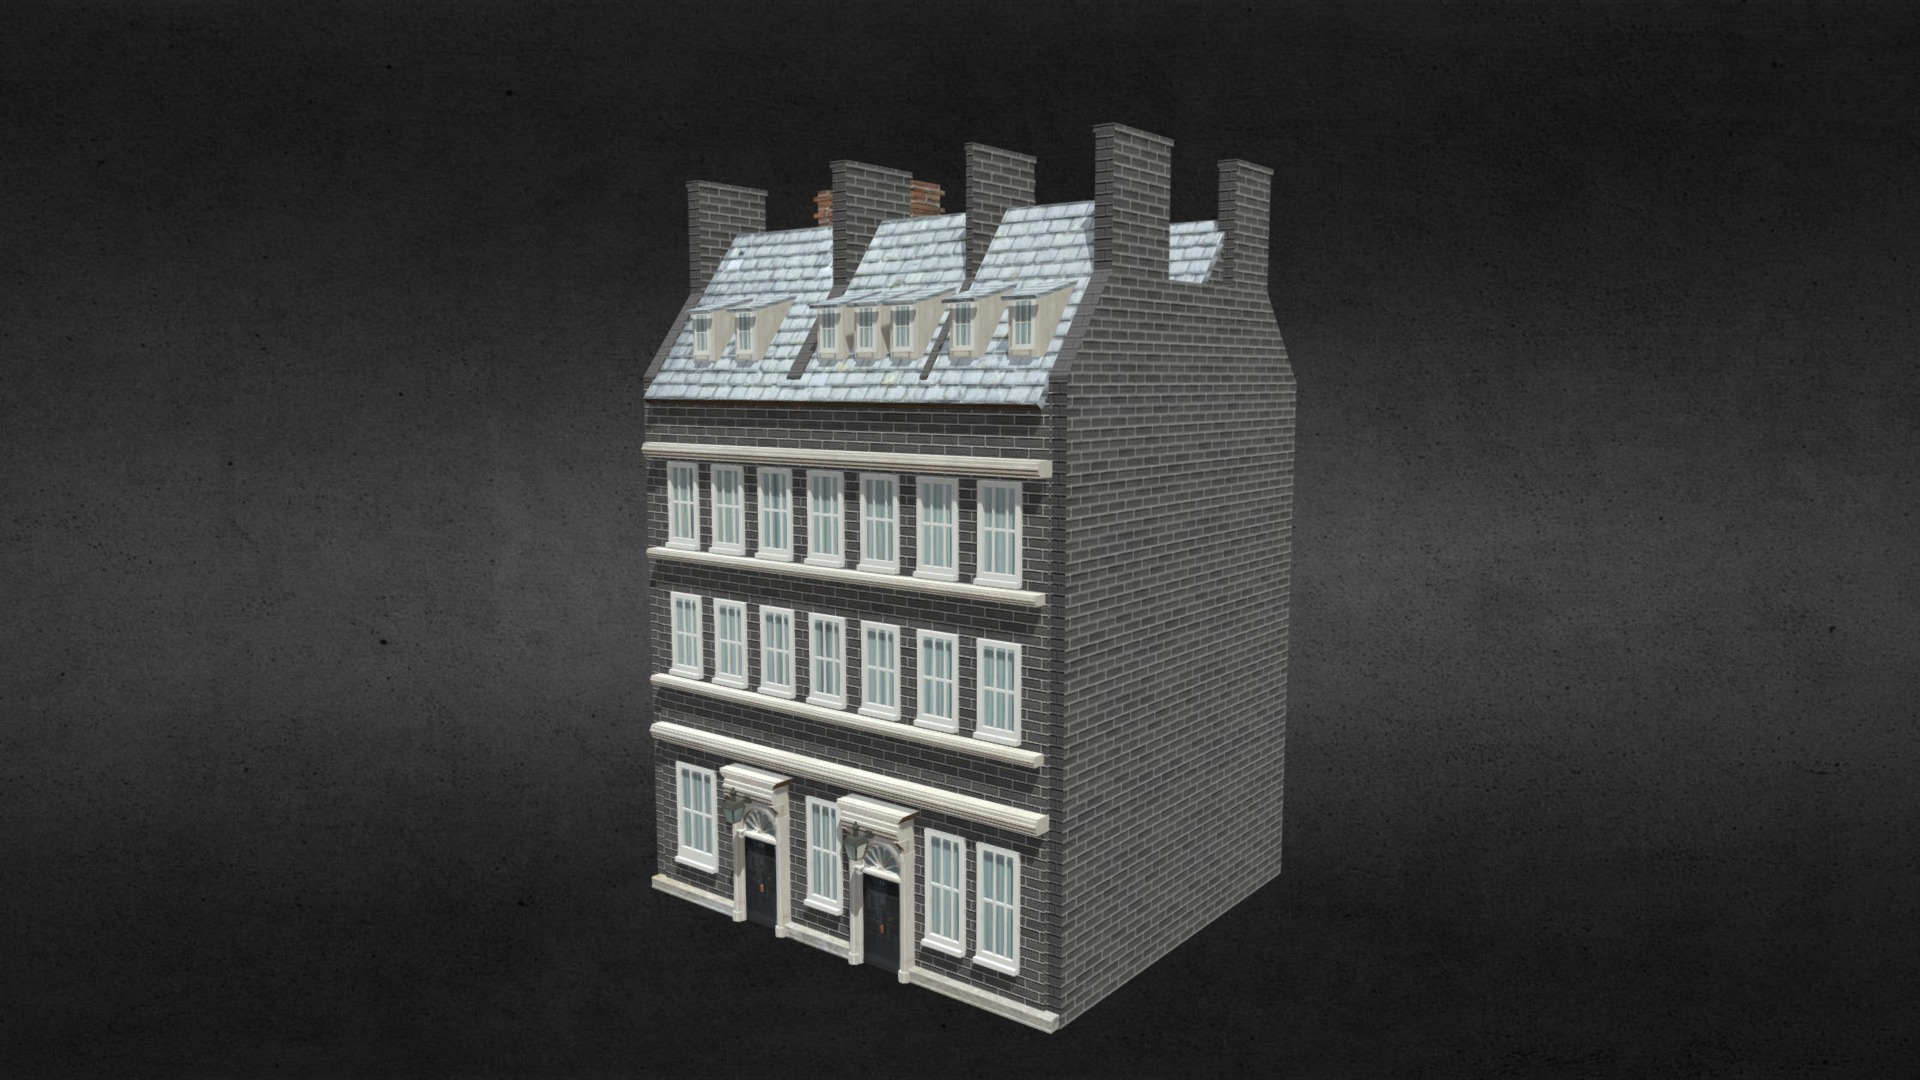 3D model No10 Downing Street - This is a 3D model of the No10 Downing Street. The 3D model is about a building with a tower.